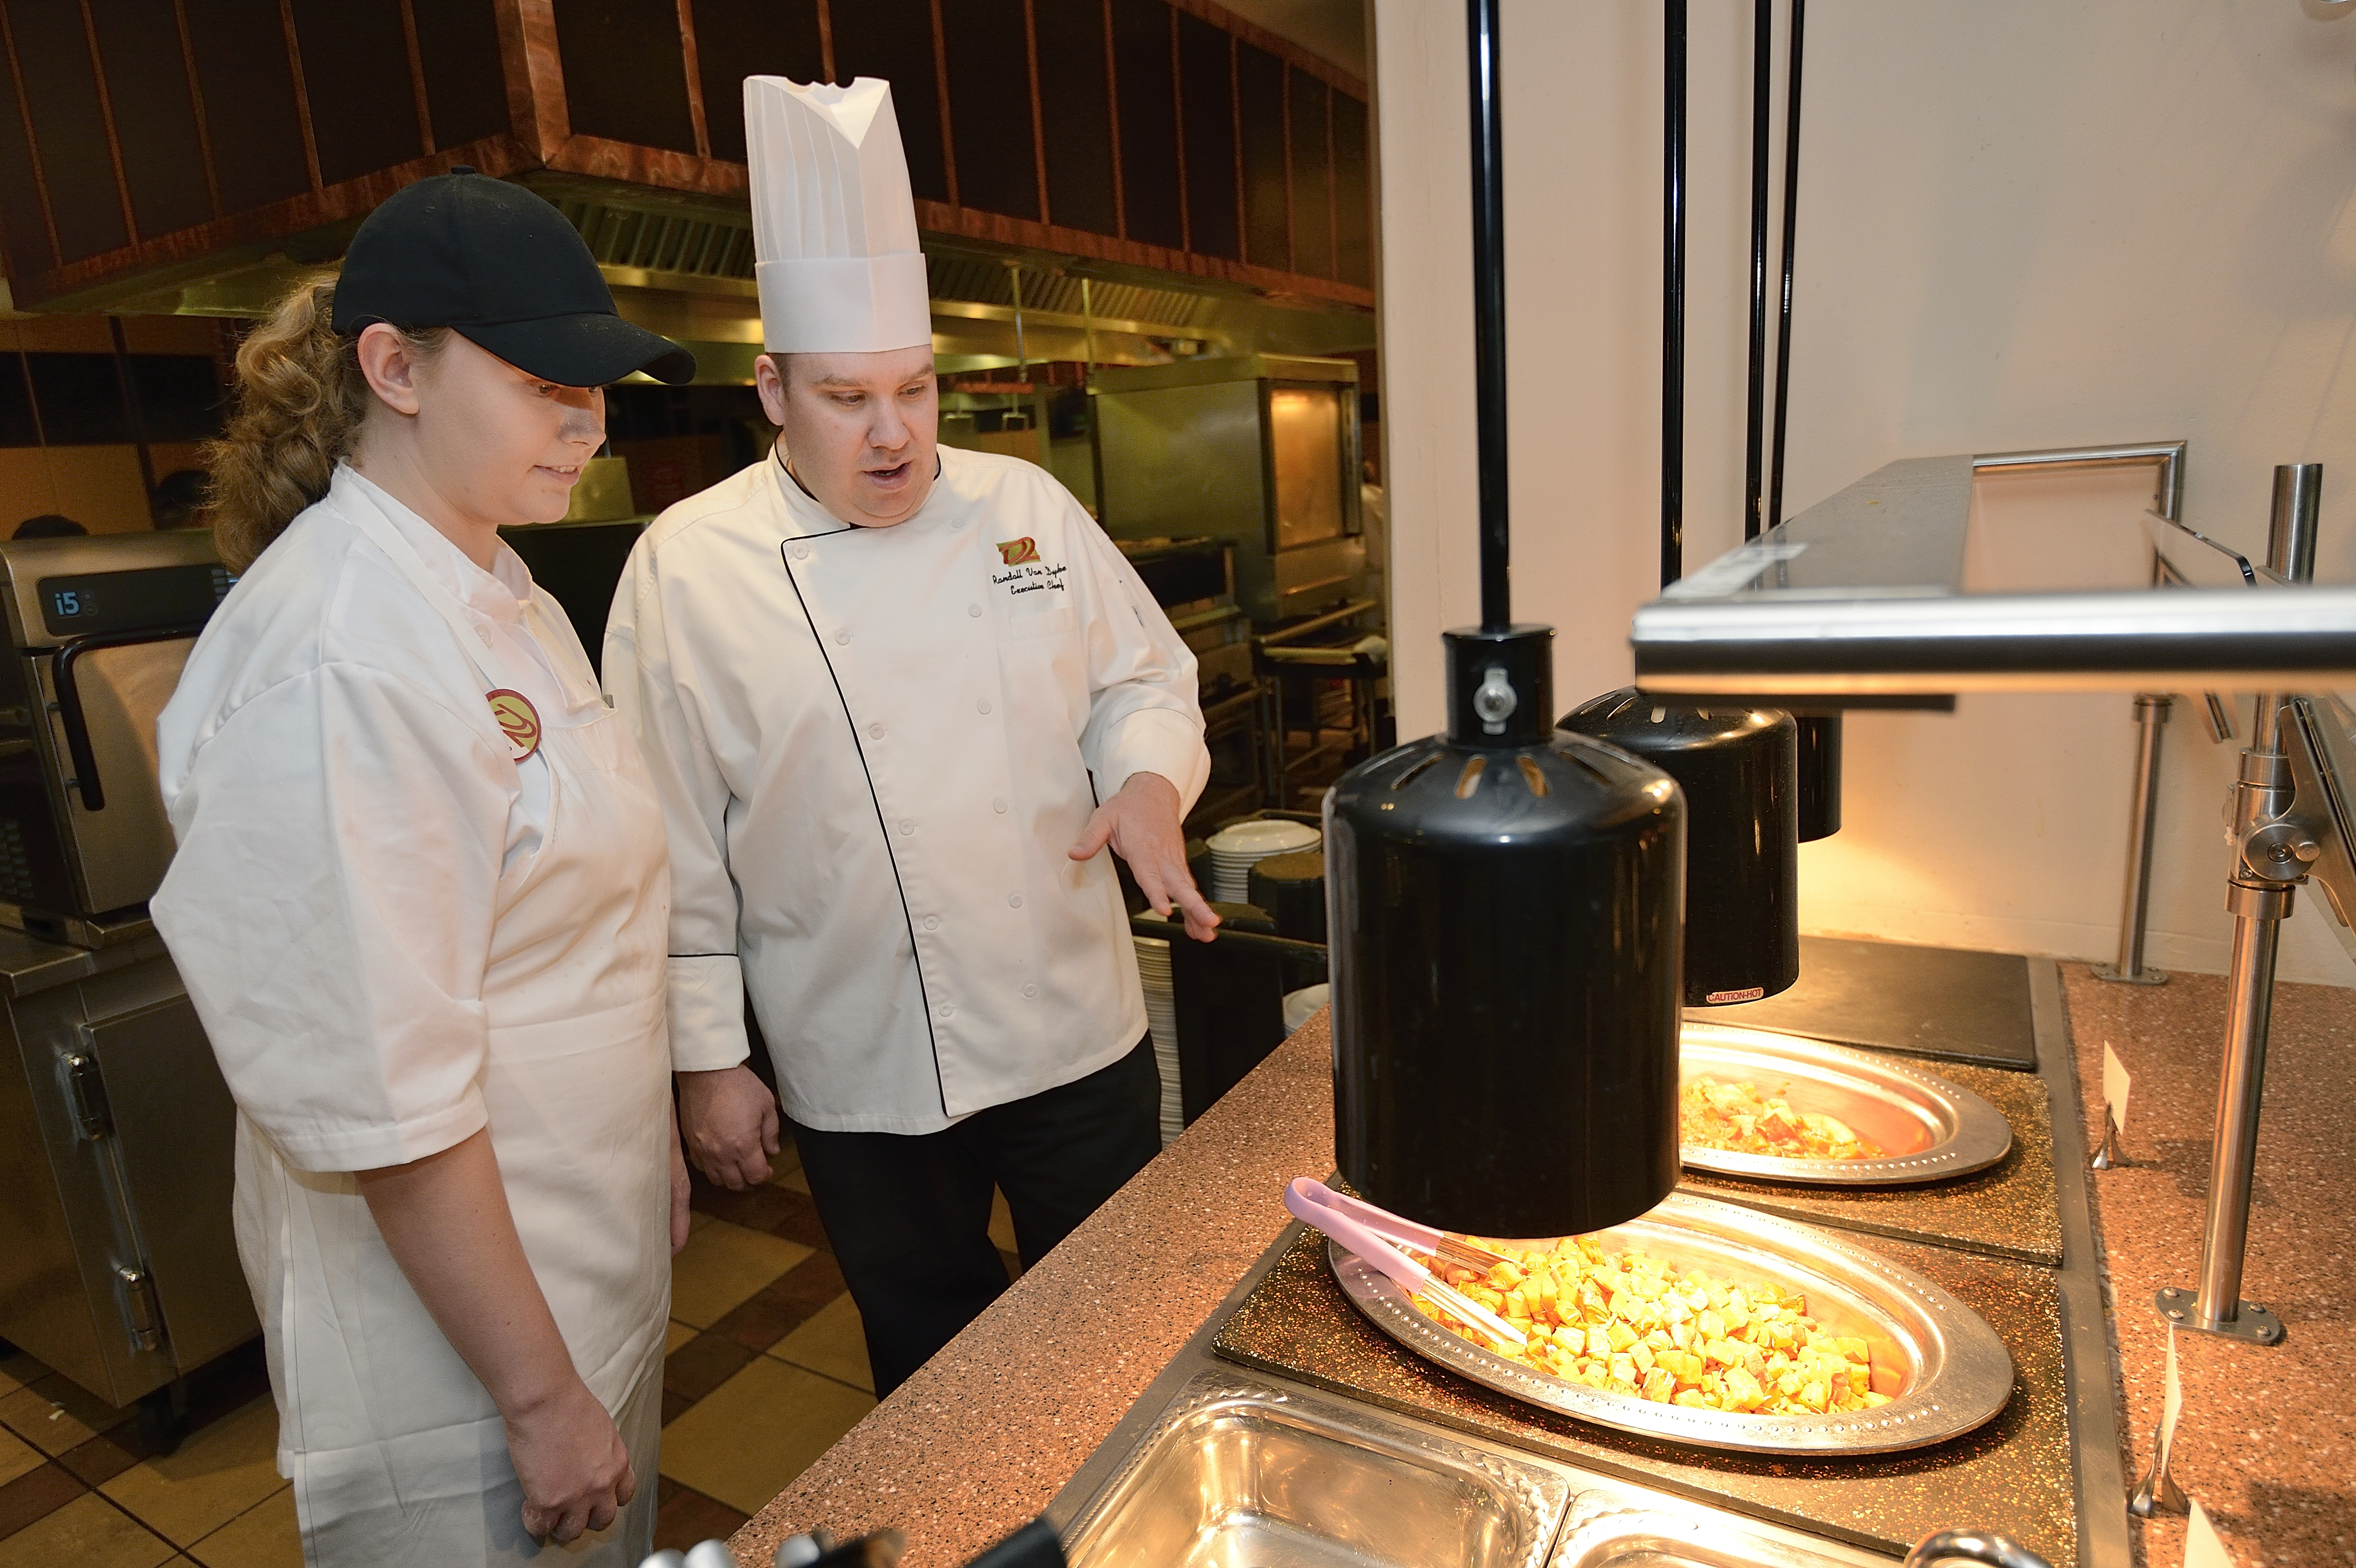 Chef Randall Van Dyke, executive chef of D2, stands with another employee as they prepare to serve dinner.